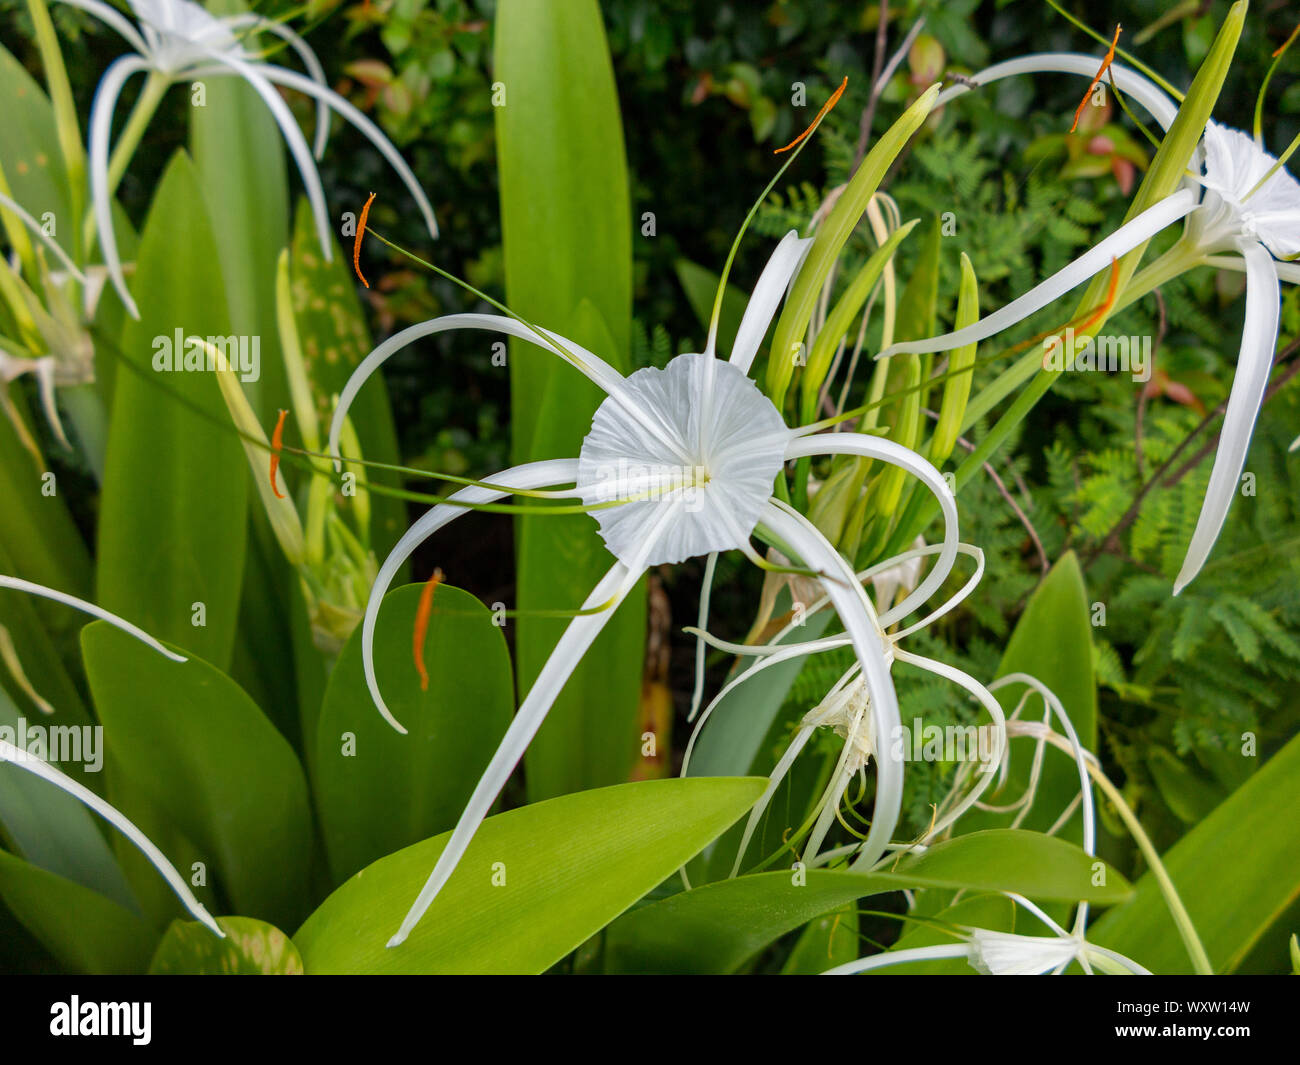 A detail of a Spider Lily (Hymenocallis) Stock Photo